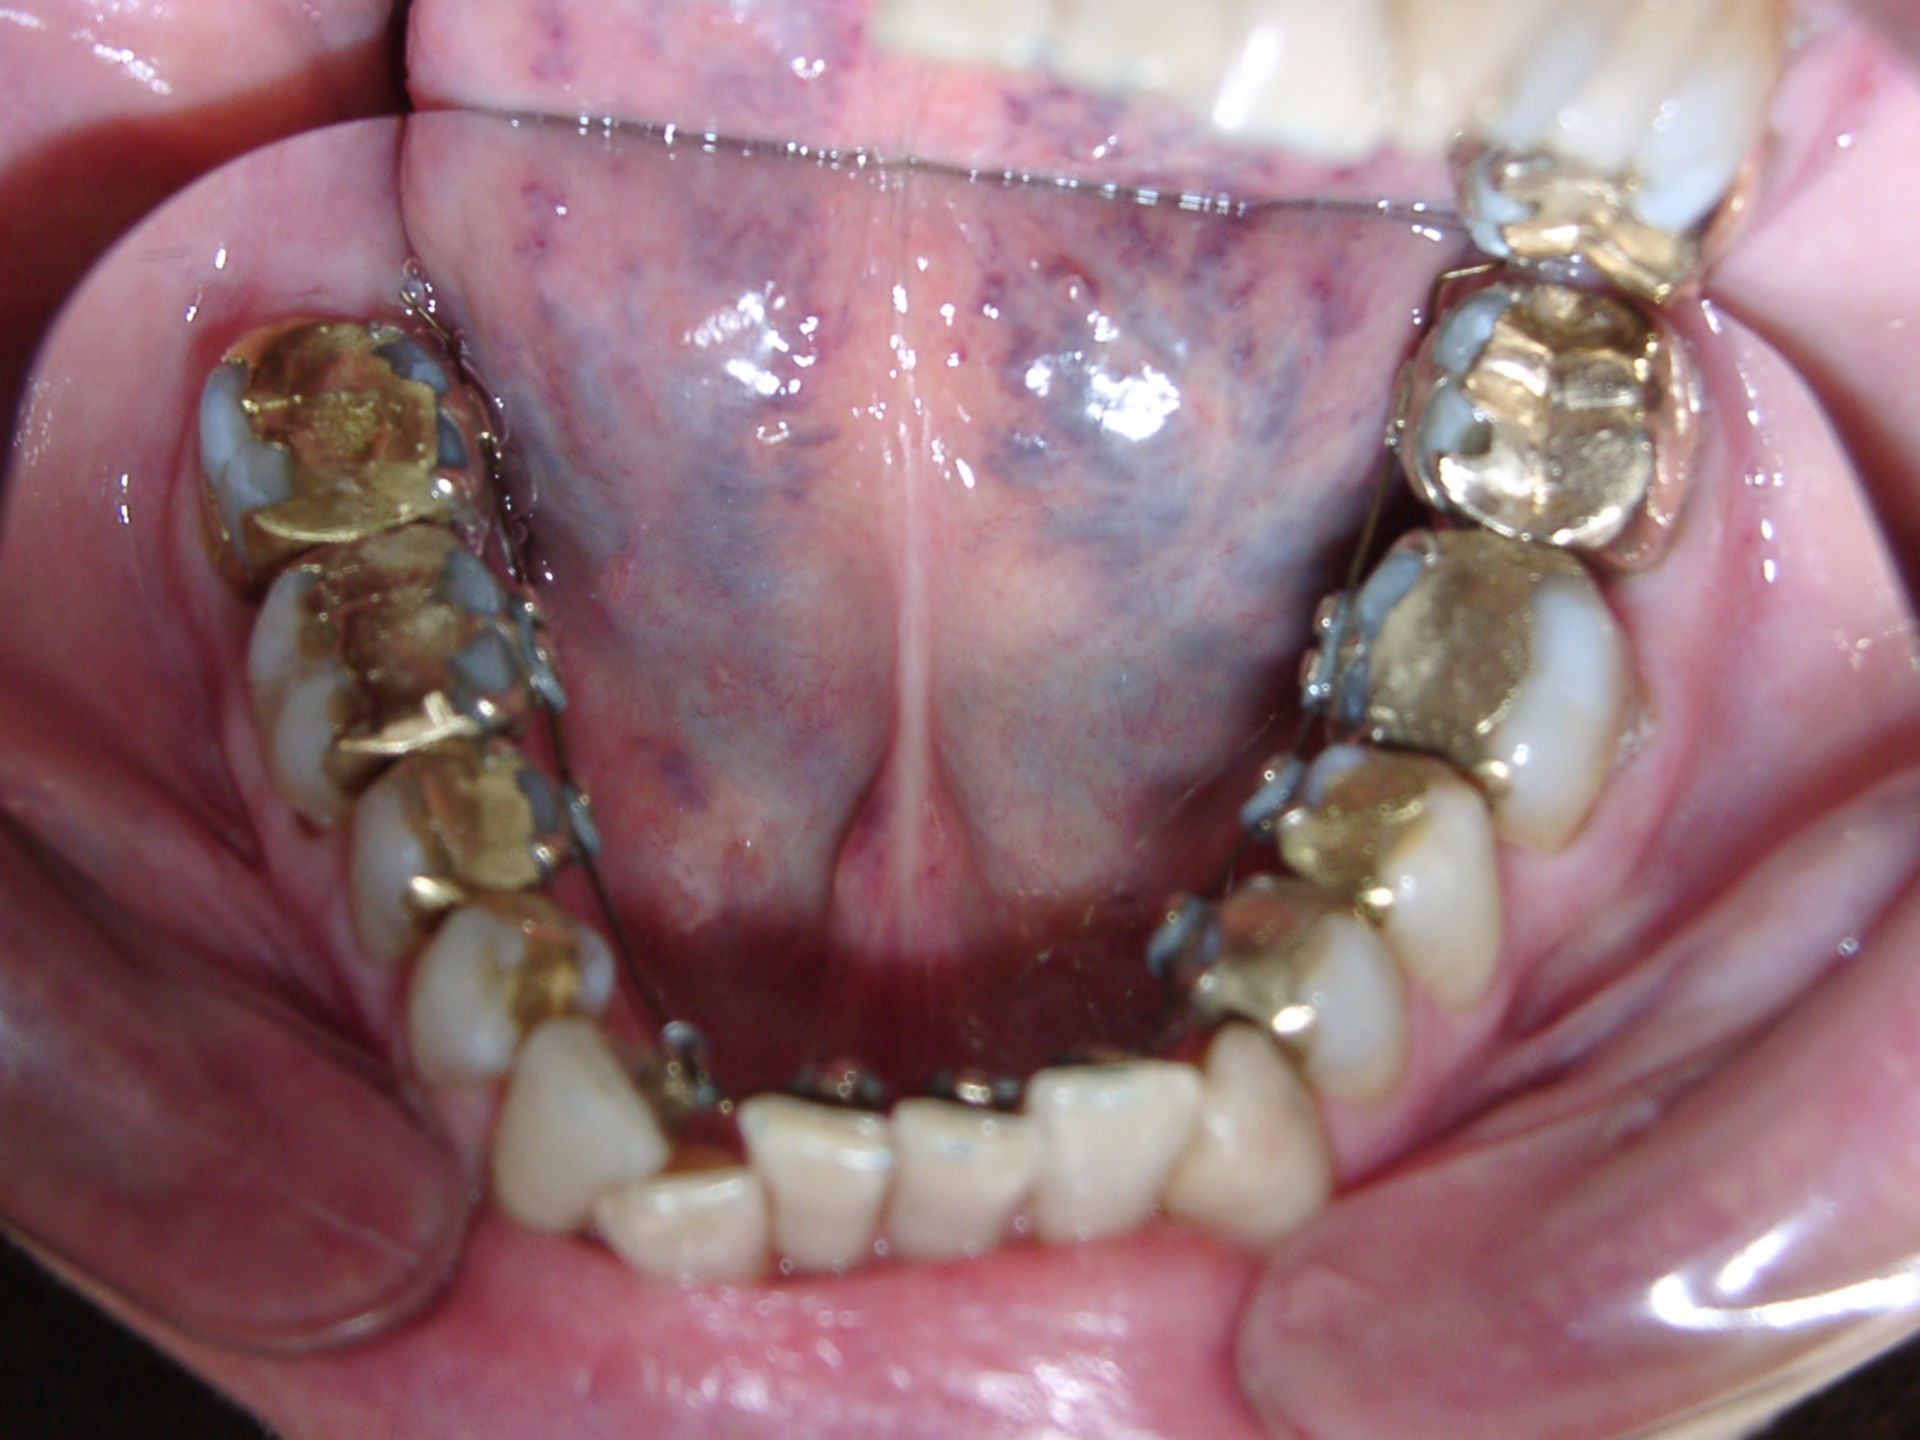 71-year-old female patient (maxilla) at the beginning of orthodontic treatment